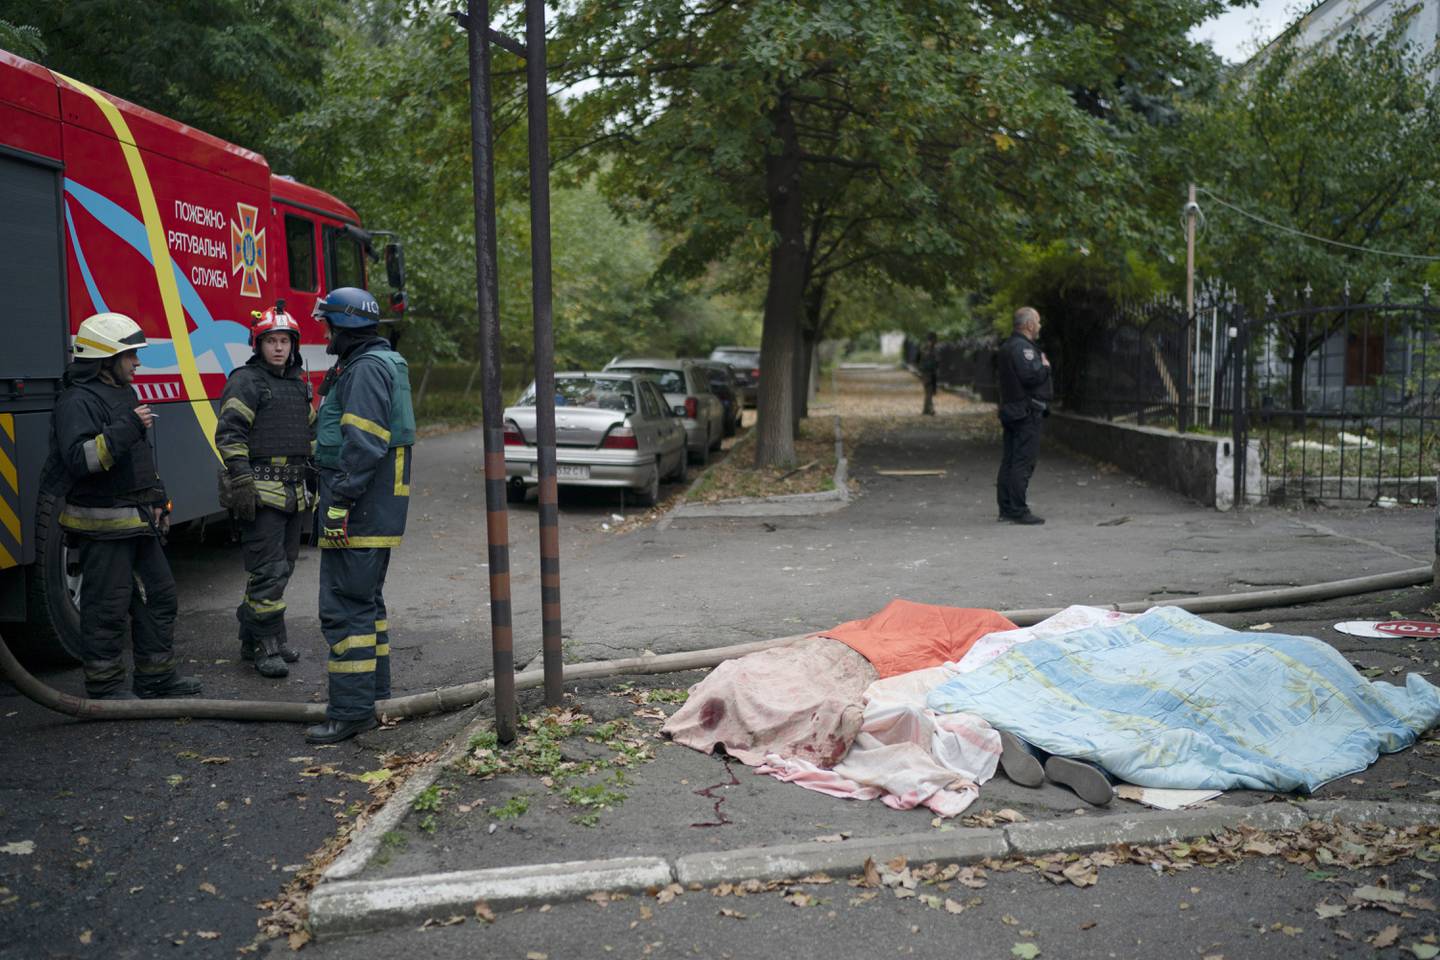 Firefighters stand next to three bodies, covered by blankets, following a Russian attack in Dnipro, Ukraine, Monday, Oct. 10, 2022. Explosions on Monday rocked multiple cities across Ukraine, including missile strikes on the capital Kyiv for the first time in months. (AP Photo/Leo Correa)